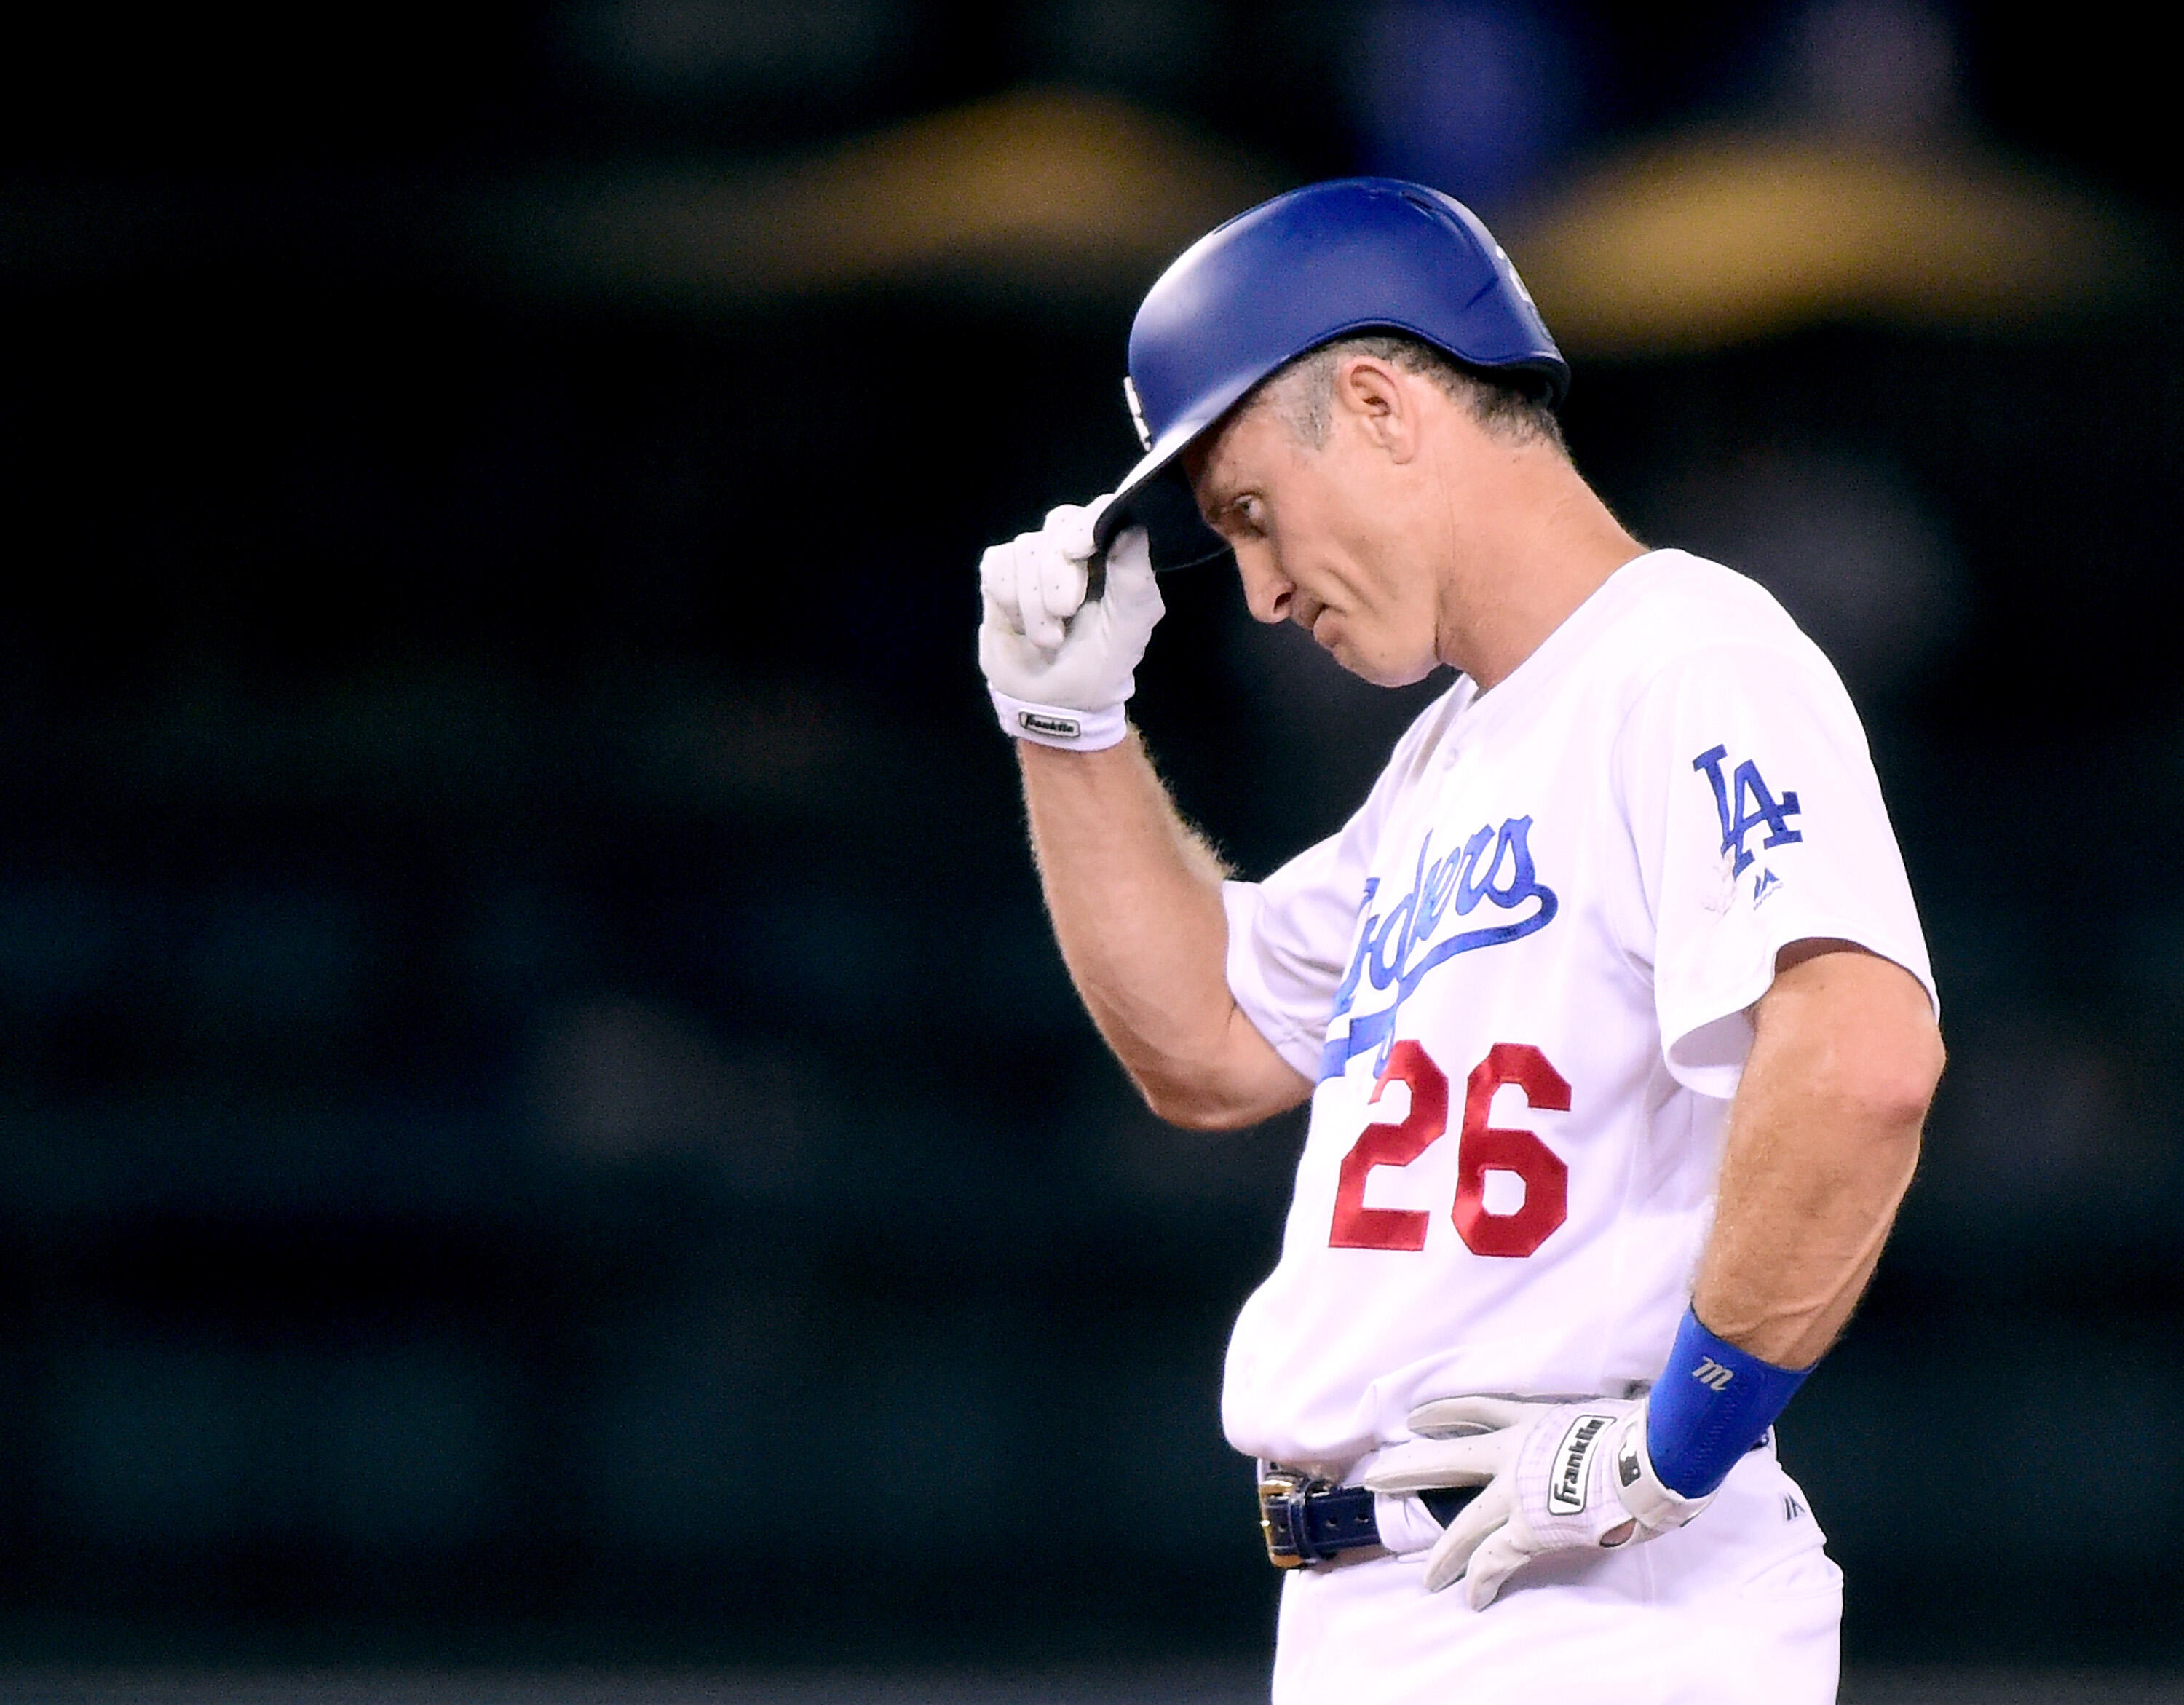 Chase Utley: Full Interview